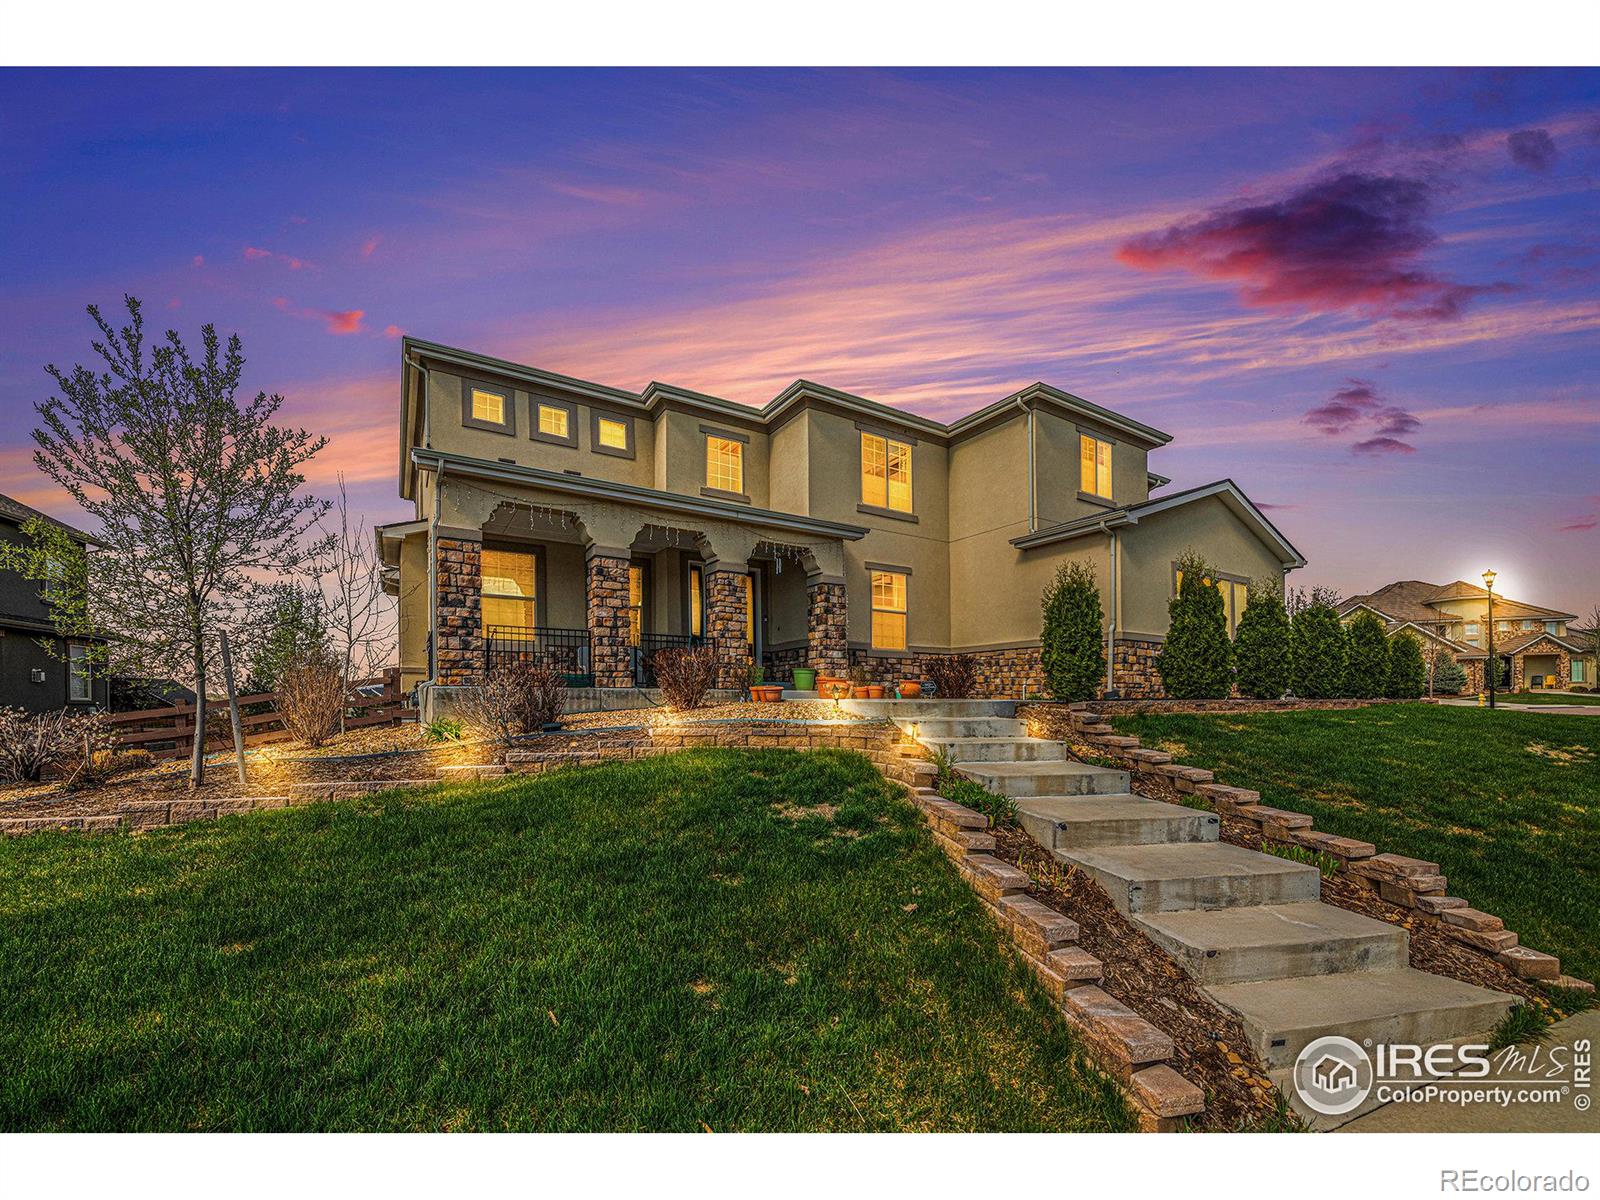 6321  Meadow Grass Court, fort collins MLS: 4567891009195 Beds: 7 Baths: 6 Price: $2,255,000